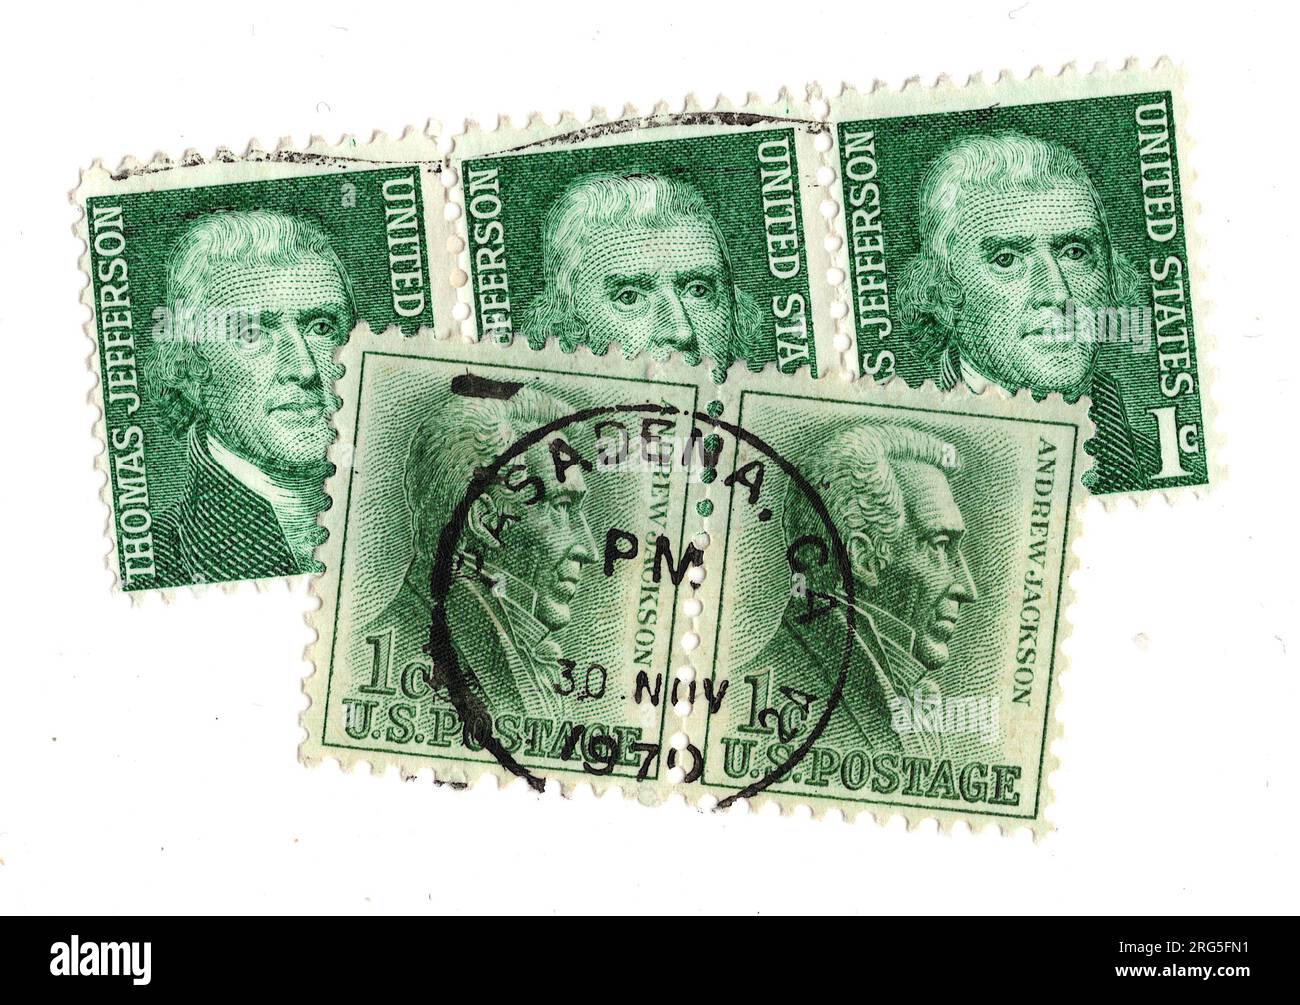 A montage of vintage postage stamps from the USA featuring Andrew Jackson on a white background. Stock Photo